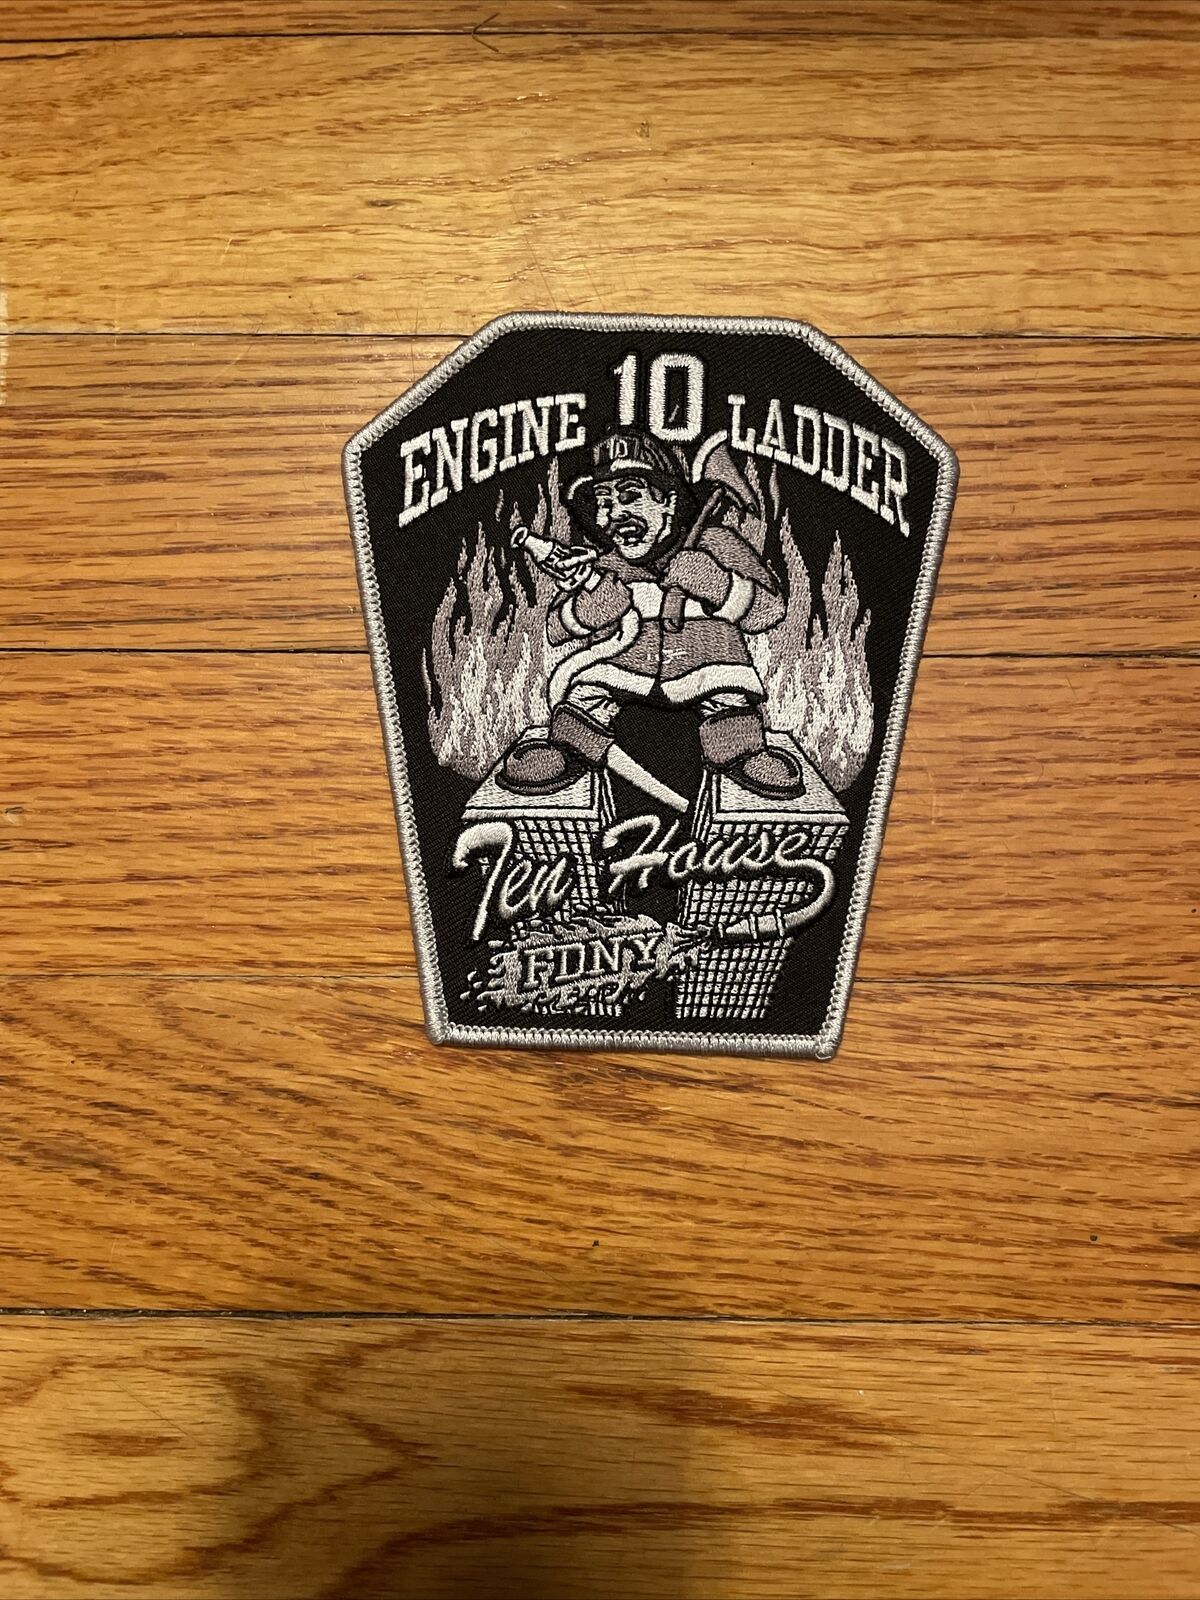 *RARE* FDNY ENGINE 10 LADDER 10 SUBDUED PATCH 